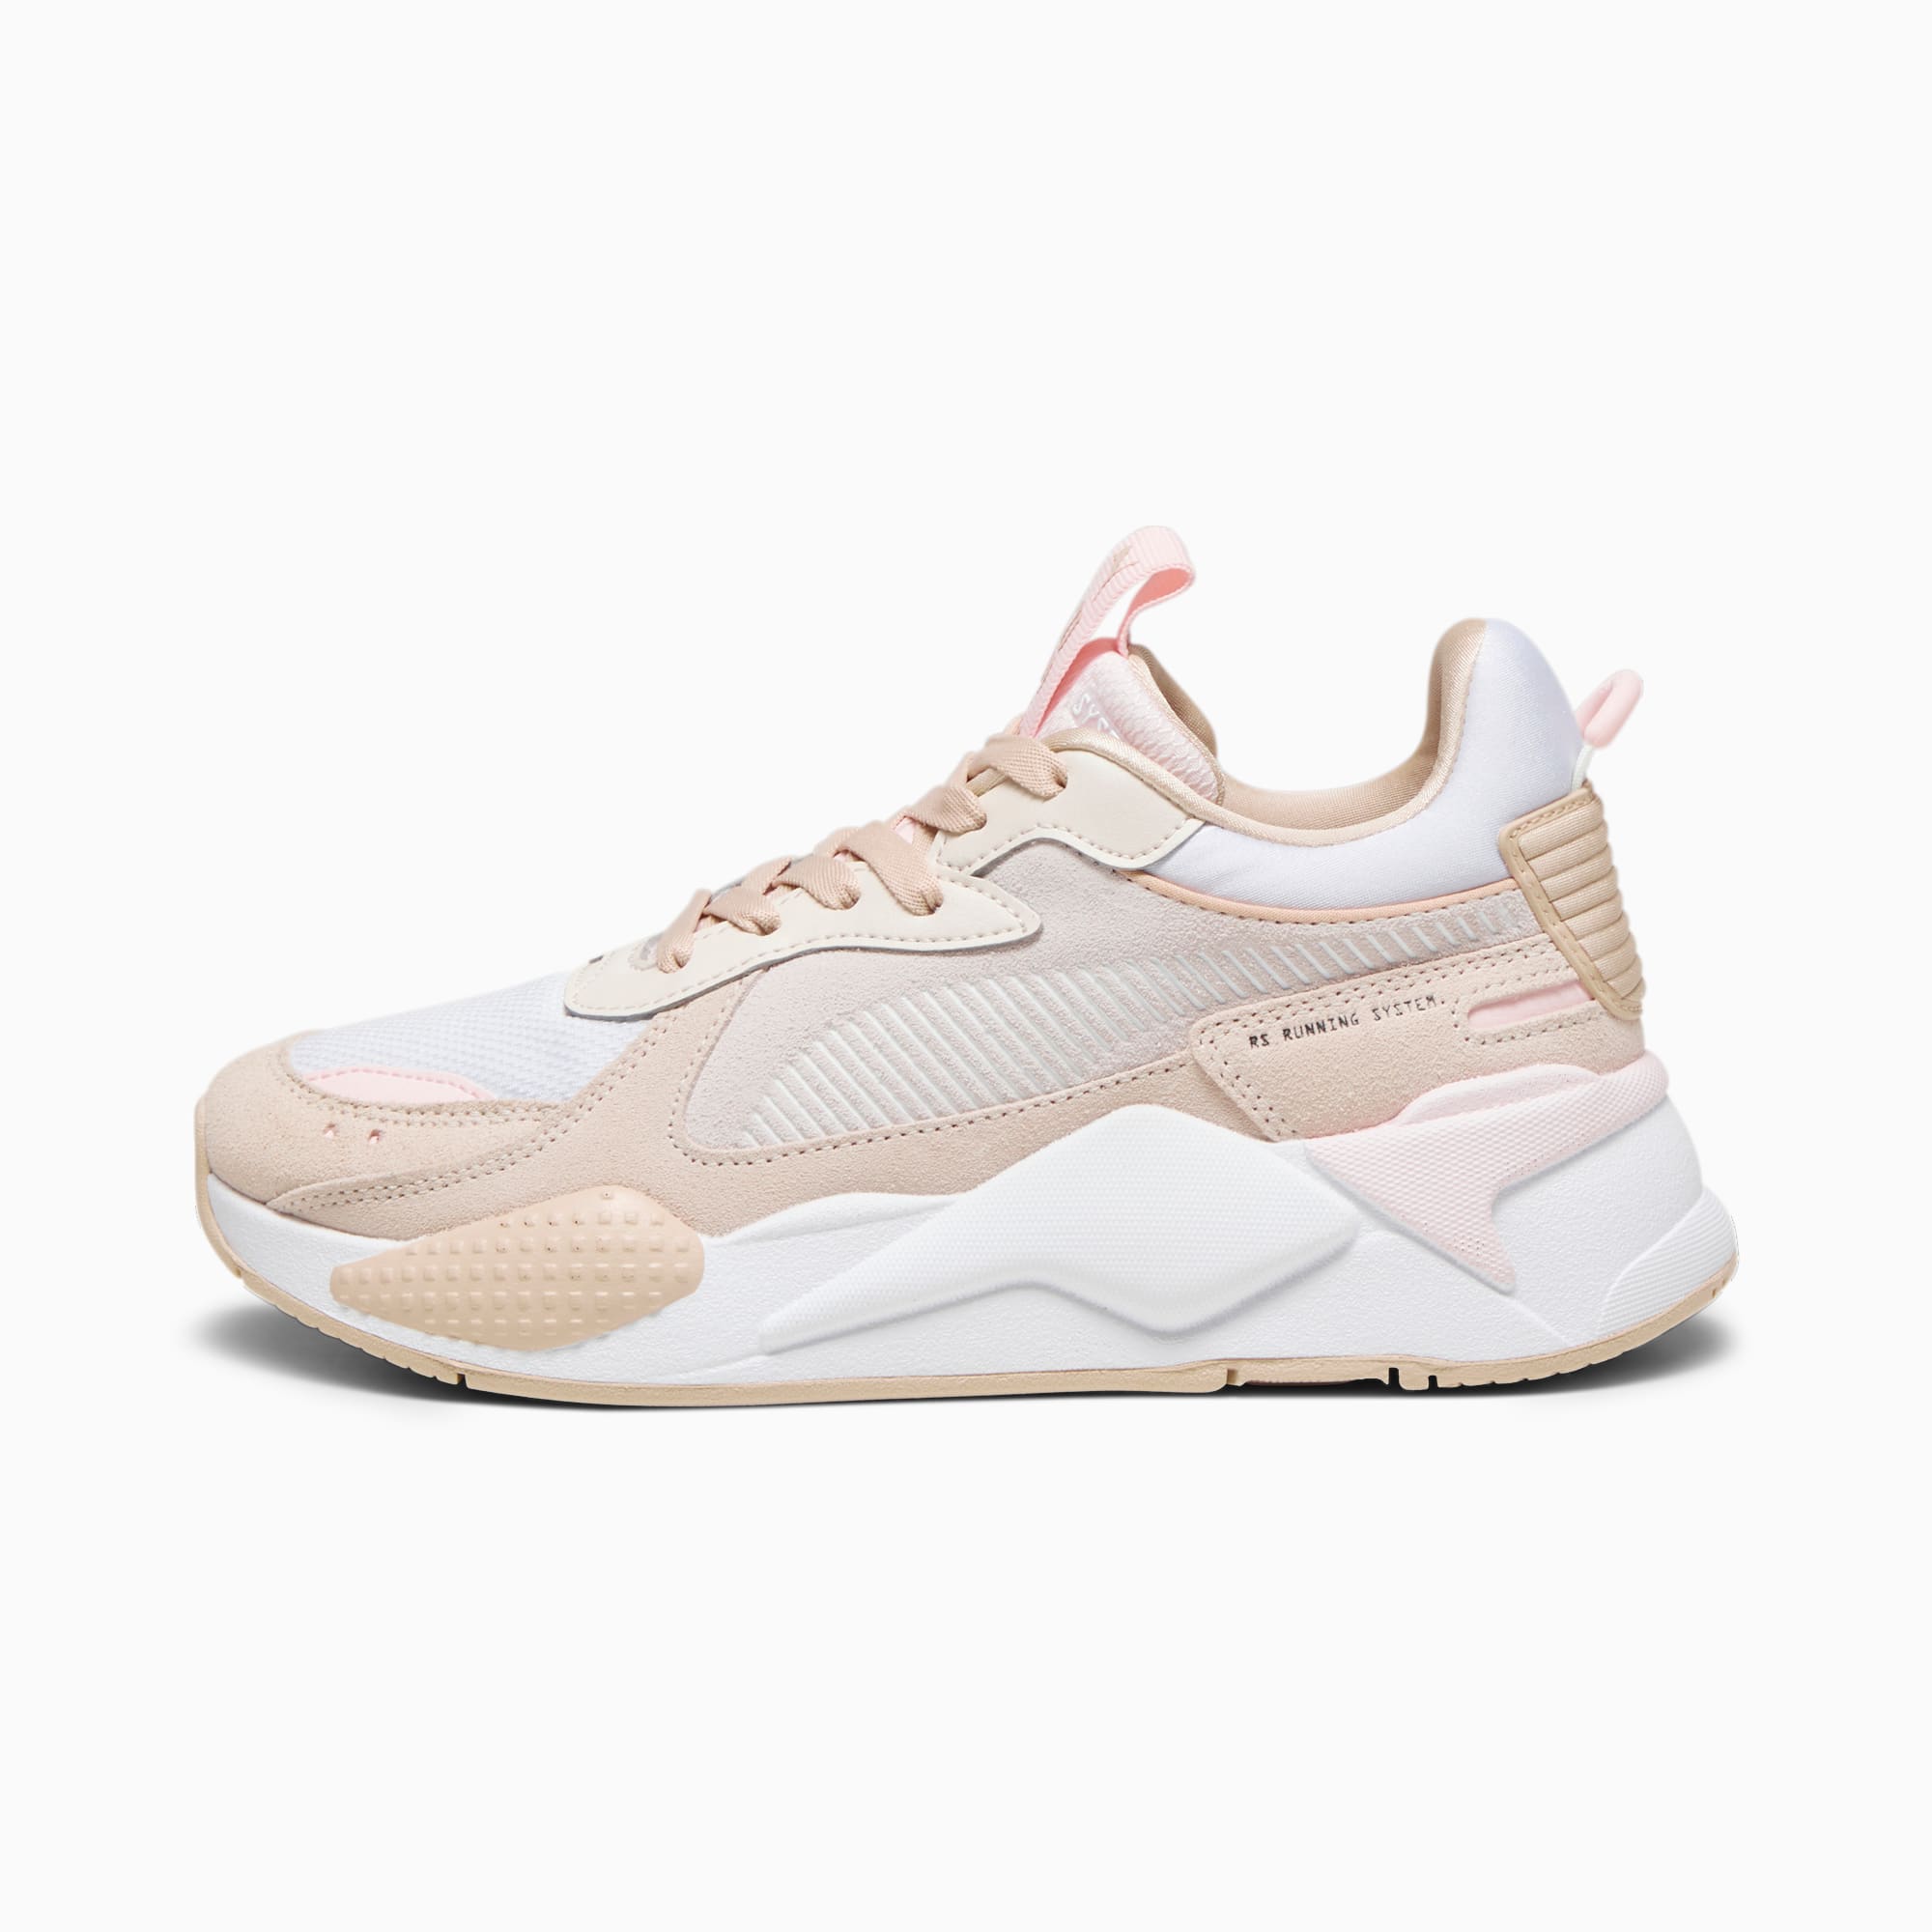 RS-X Reinvent sneaker voor dames | white | PUMA